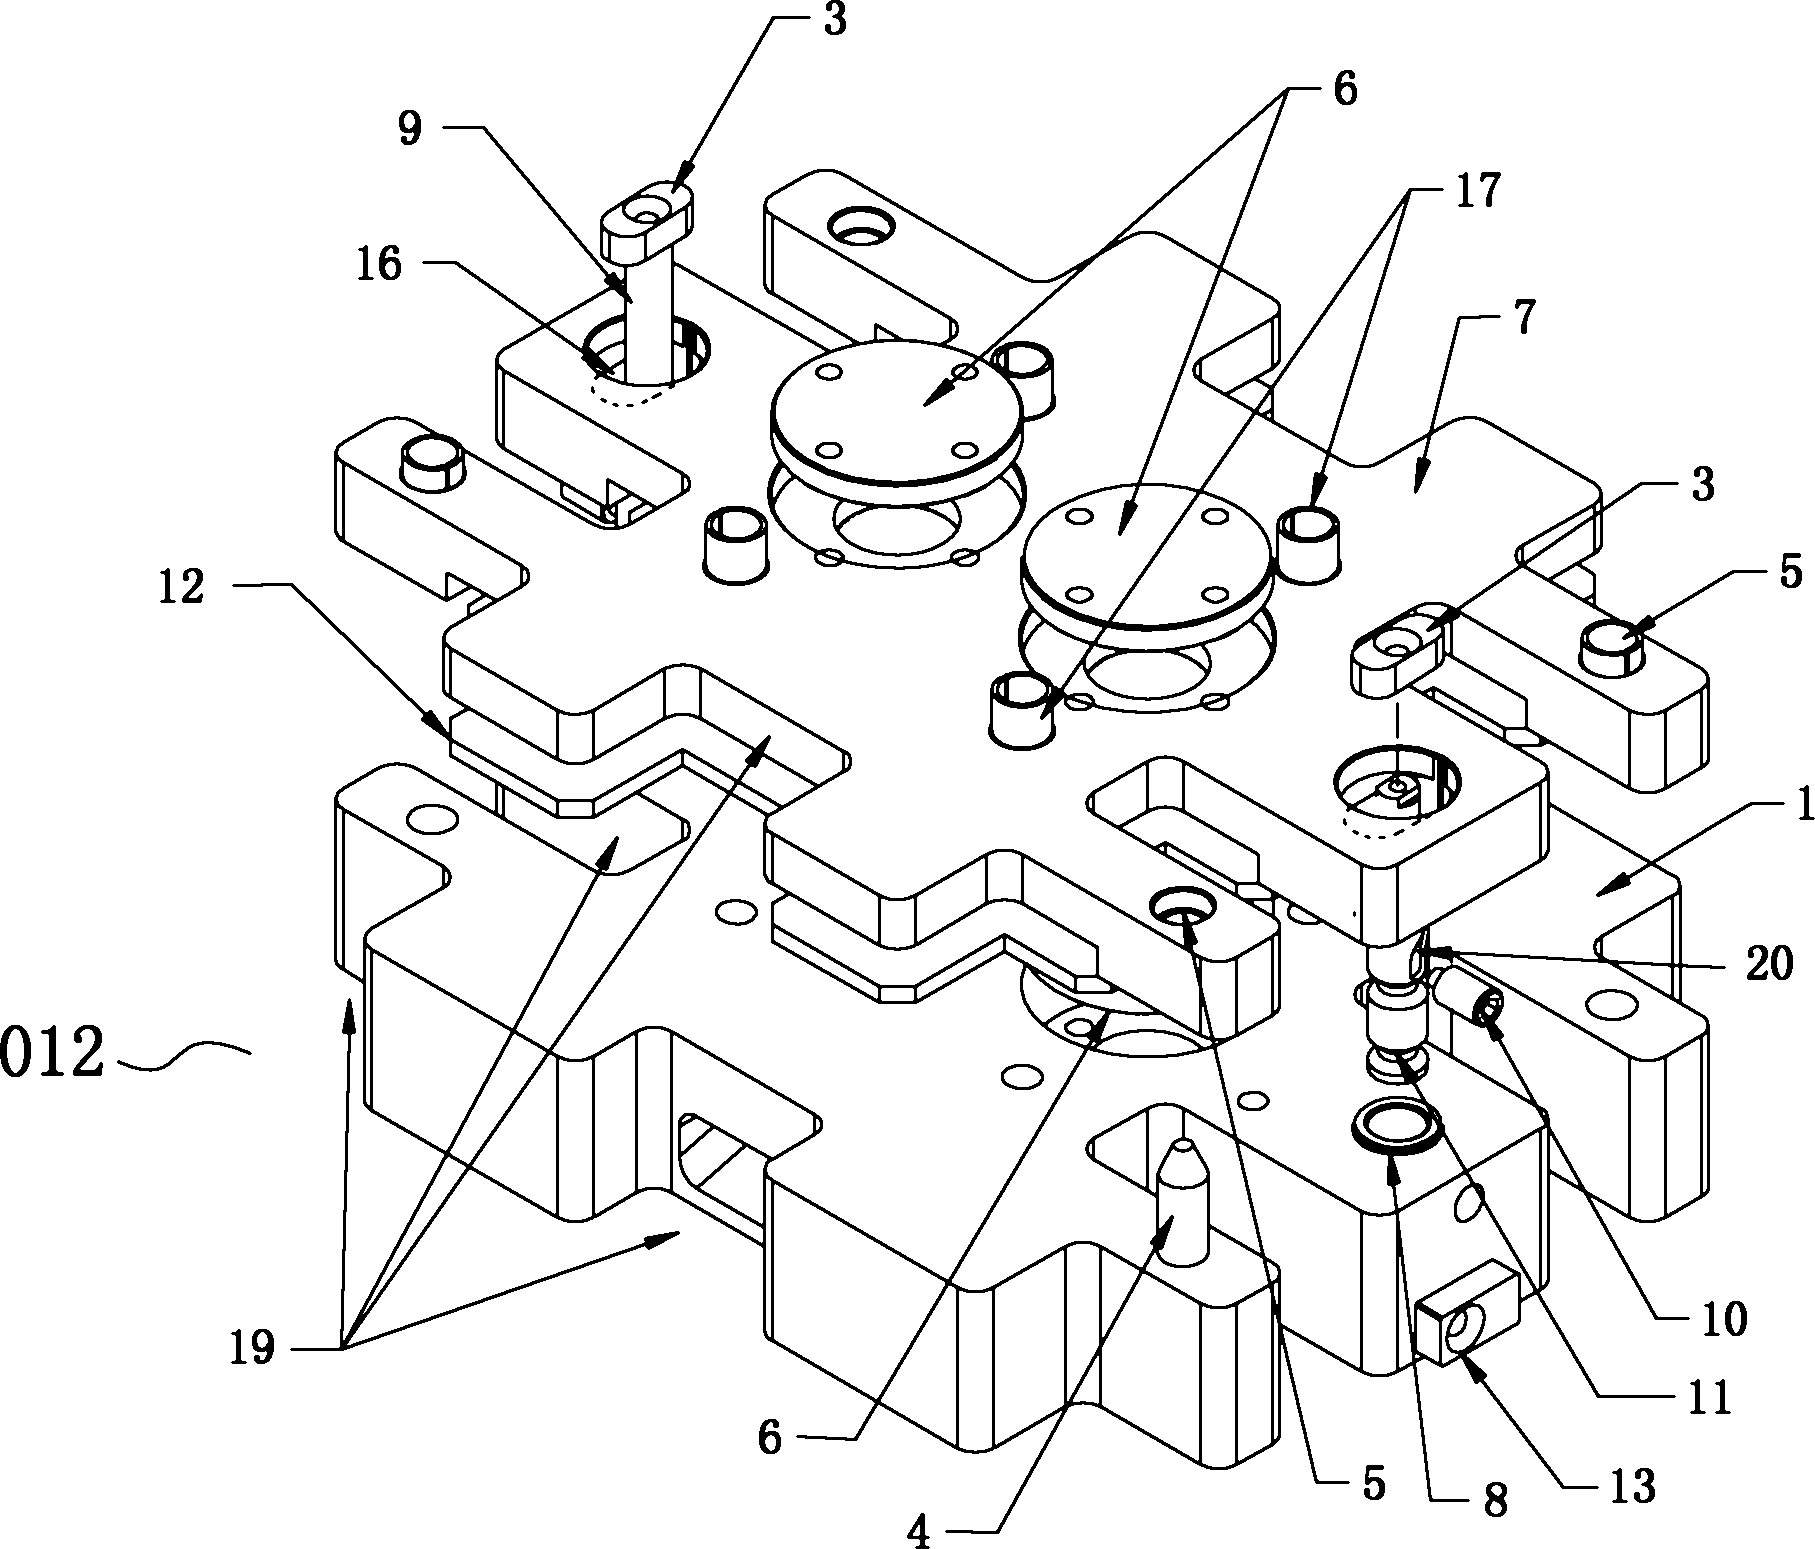 Turnover fixture, power battery assembling method and equipment